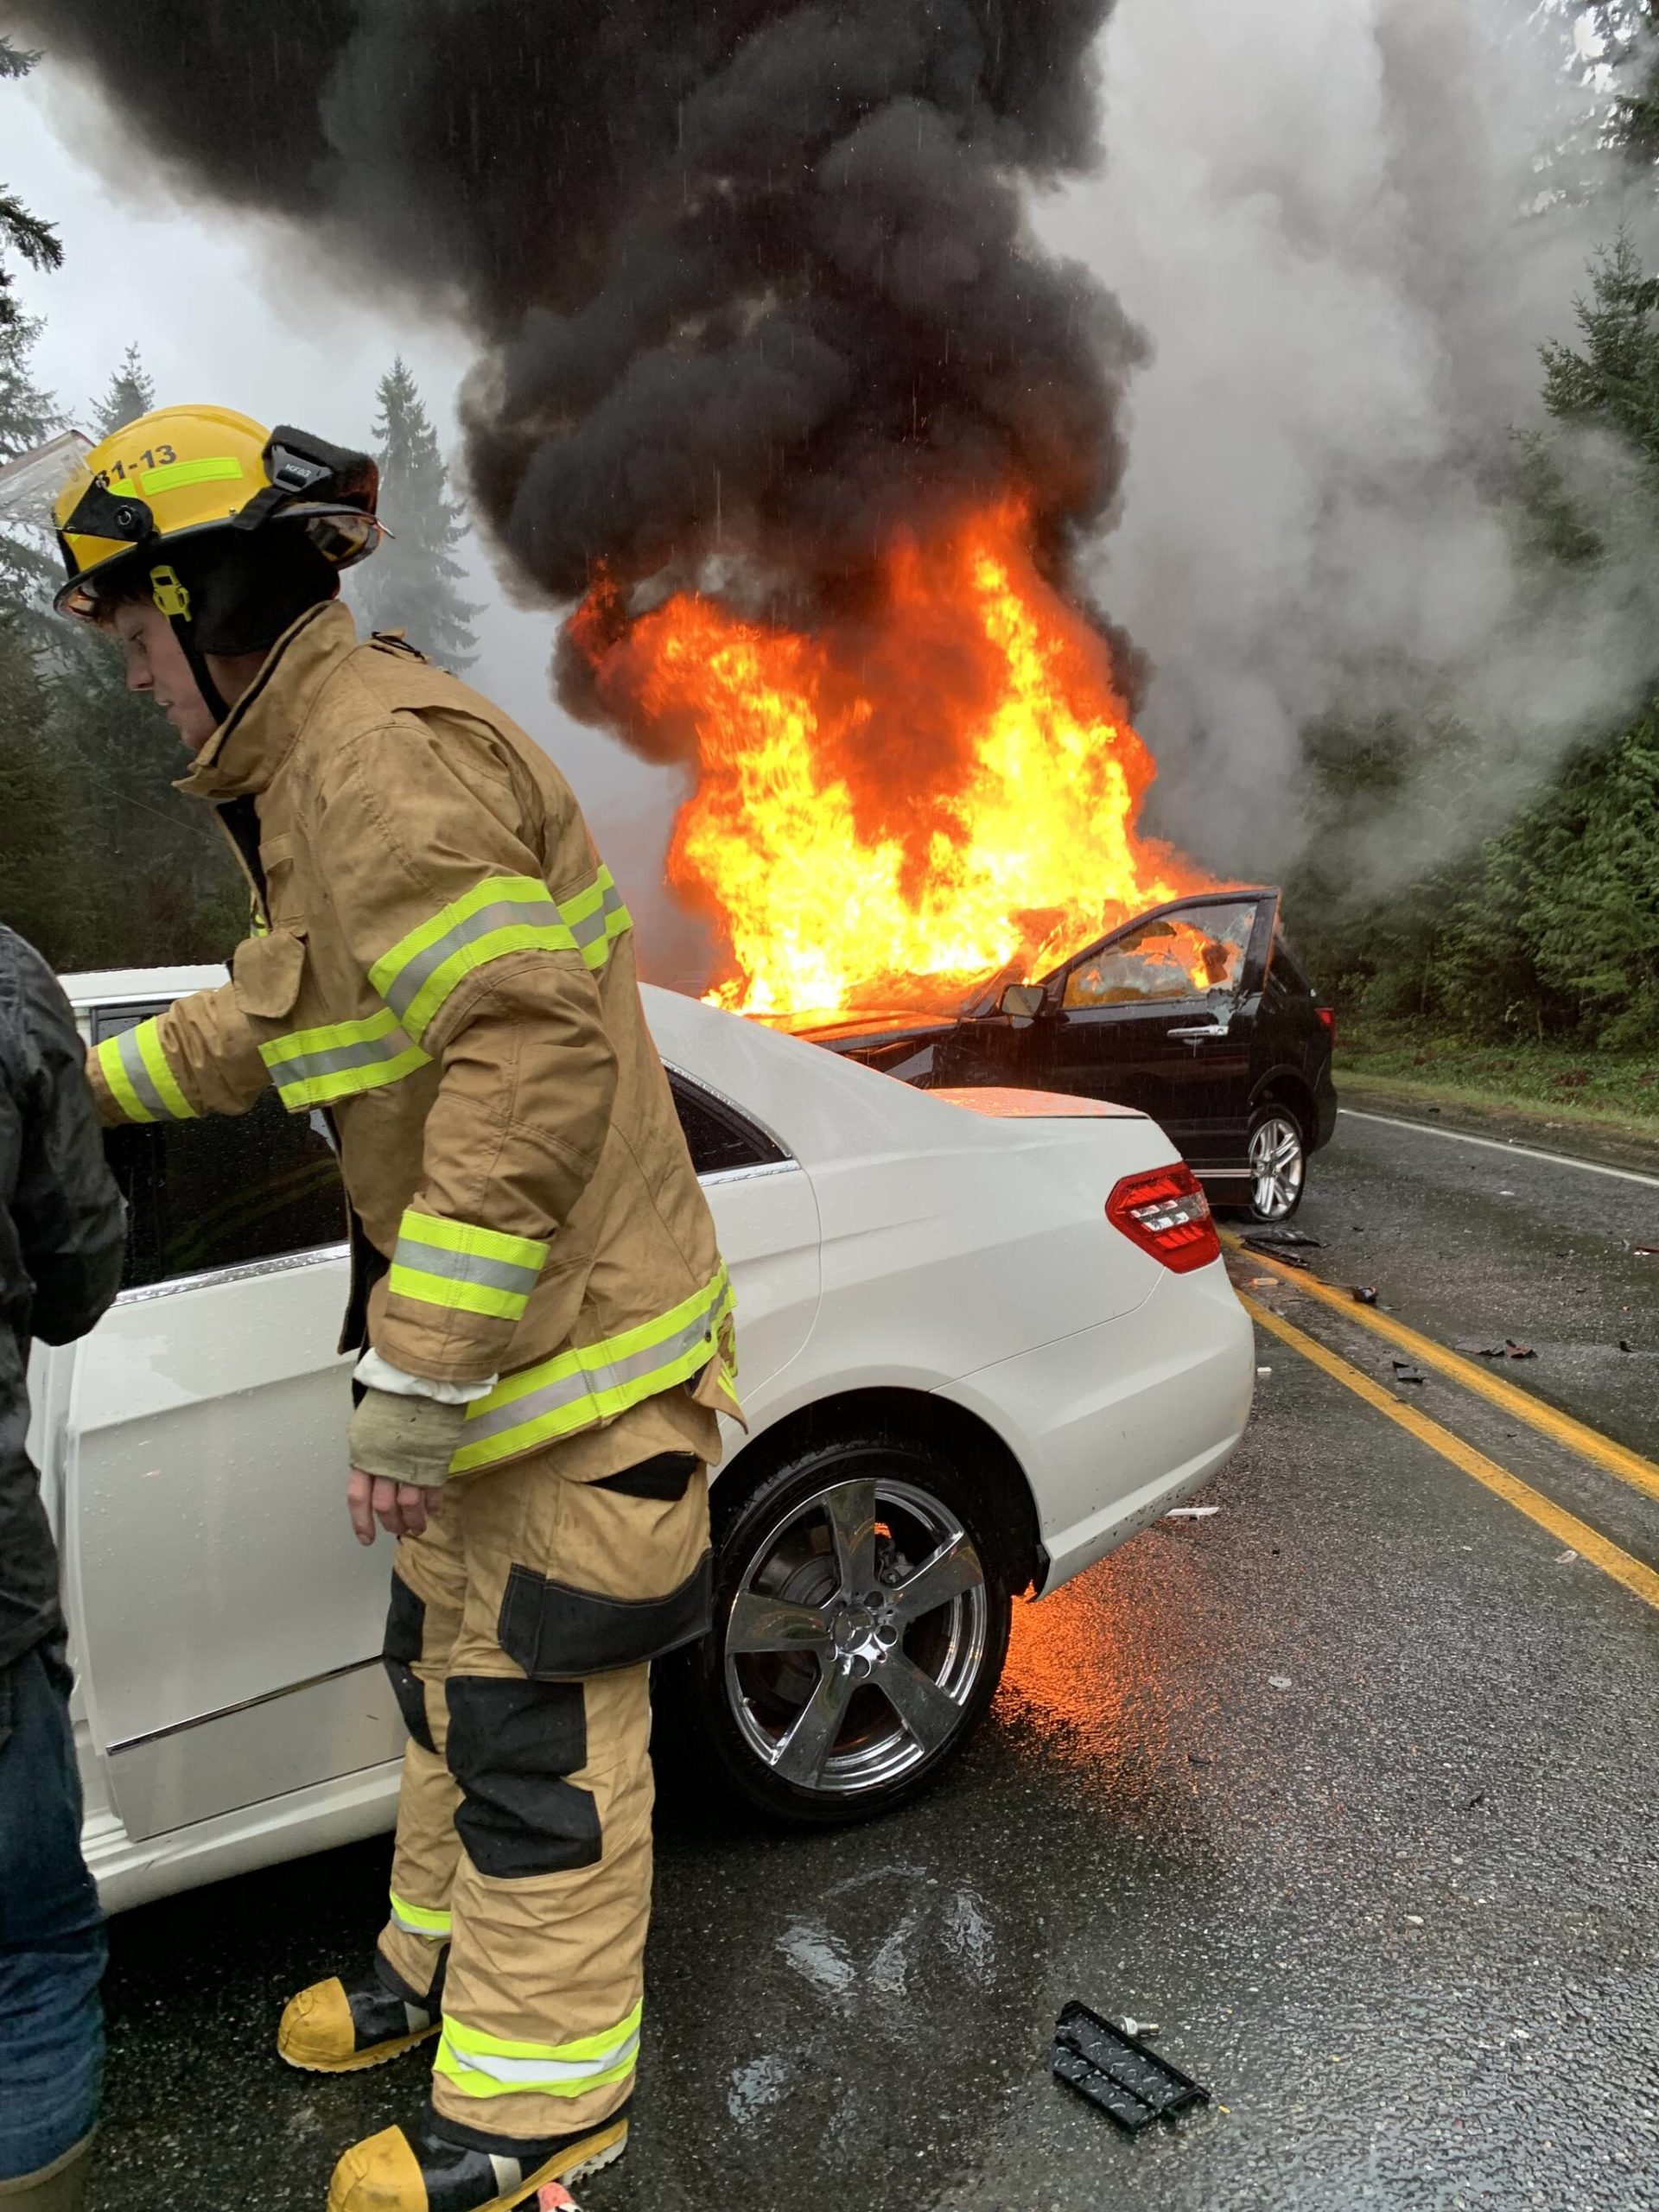 A fatal accident the afternoon of Dec. 18 near Clinton ended with one of the cars involved bursting into flames. The driver of the fully engulfed car was outside of the vehicle by the time first responders arrived at the scene. (Photo provided)